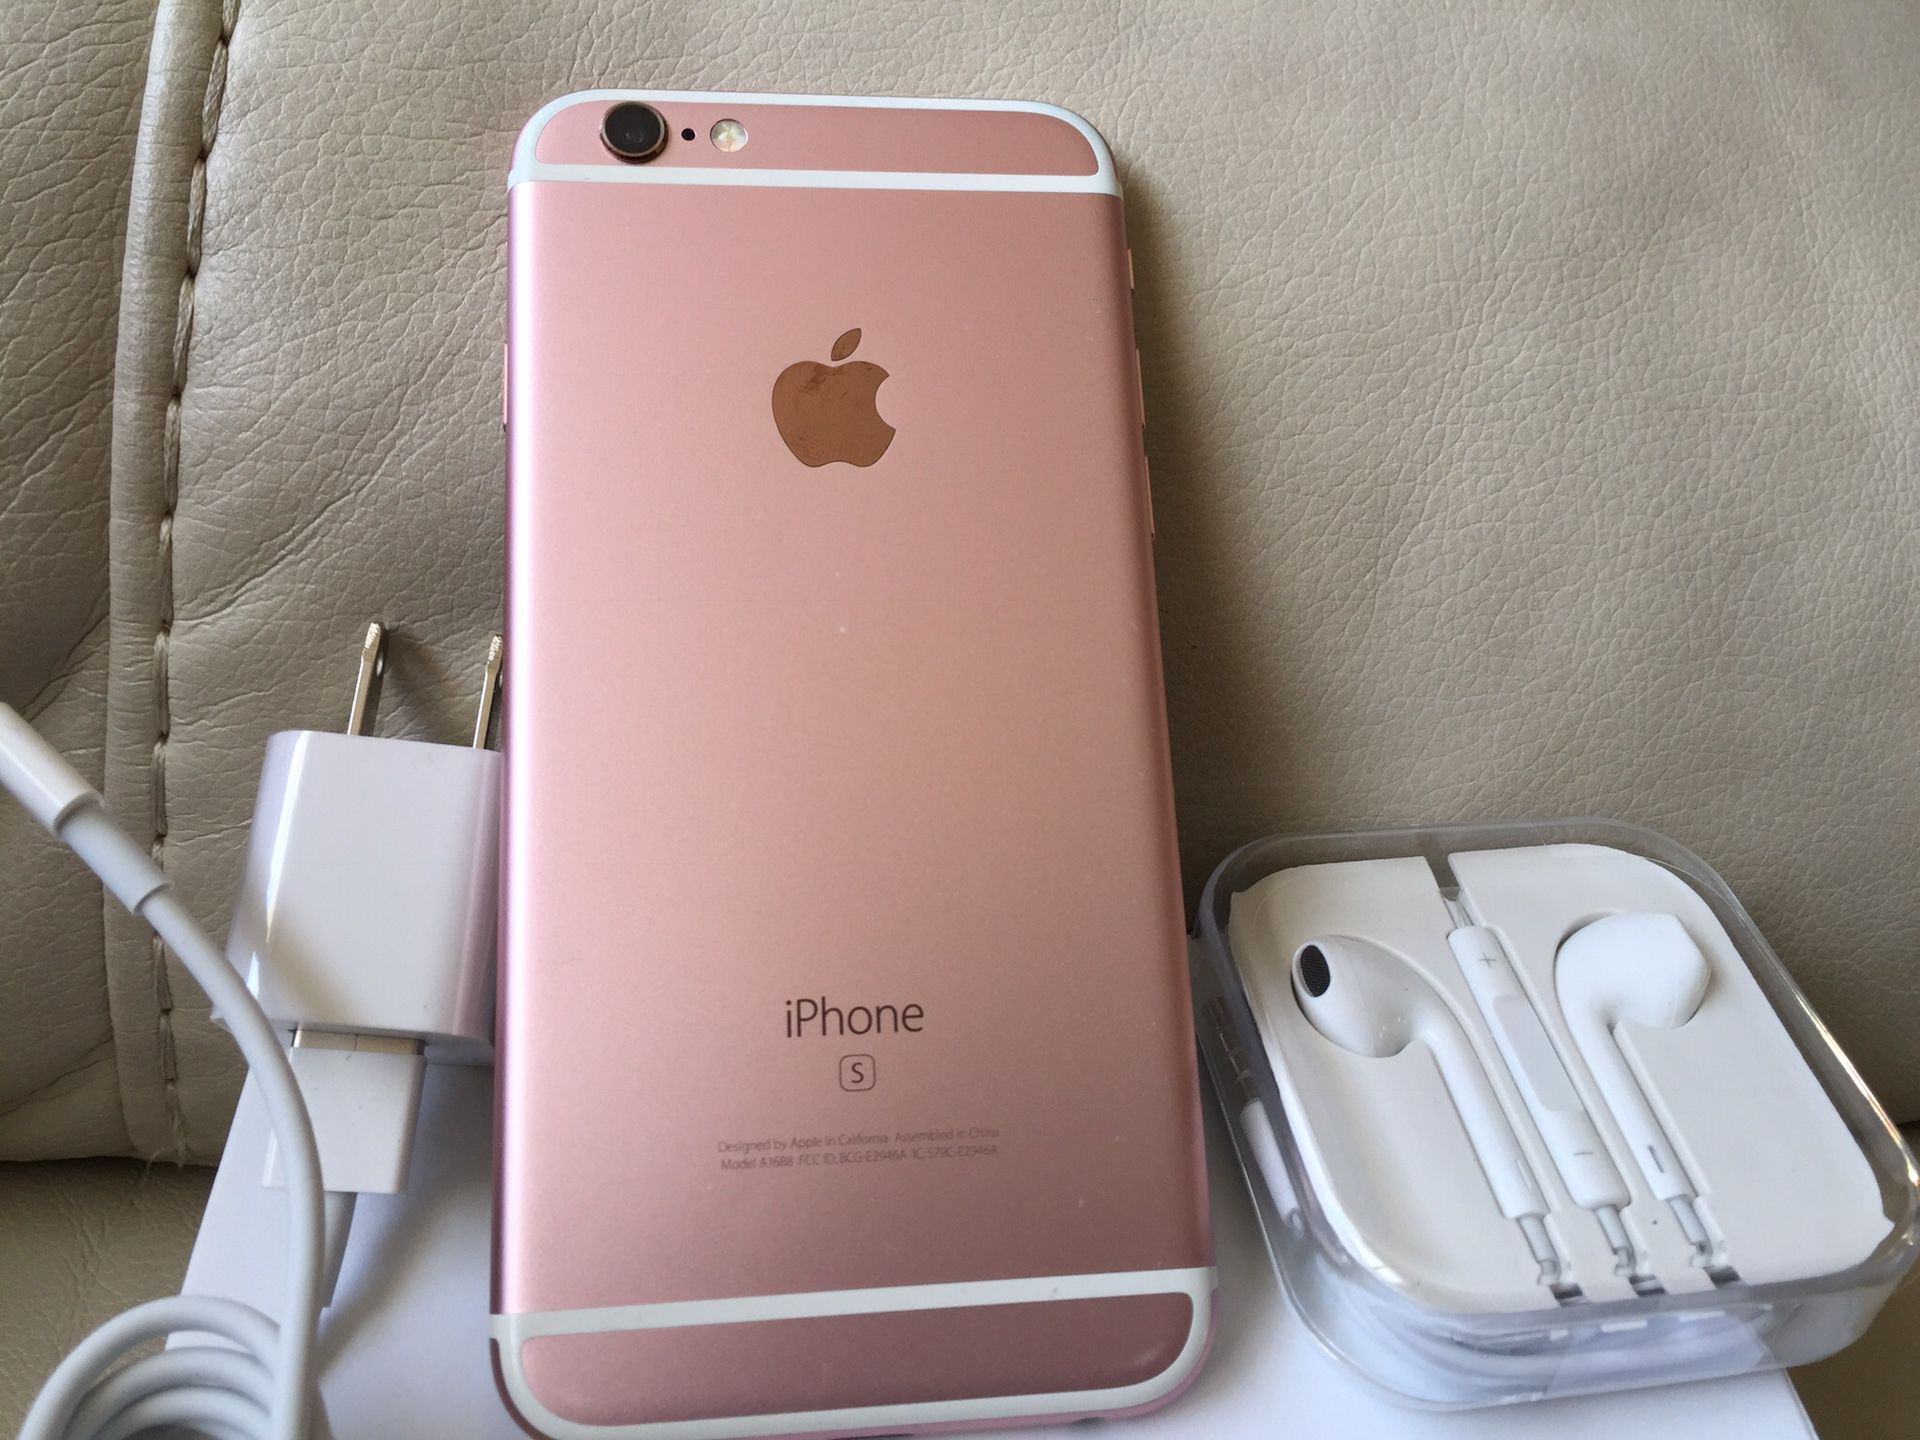 iPhone 6s Rose Gold,16 GB, excellent condition factory unlocked